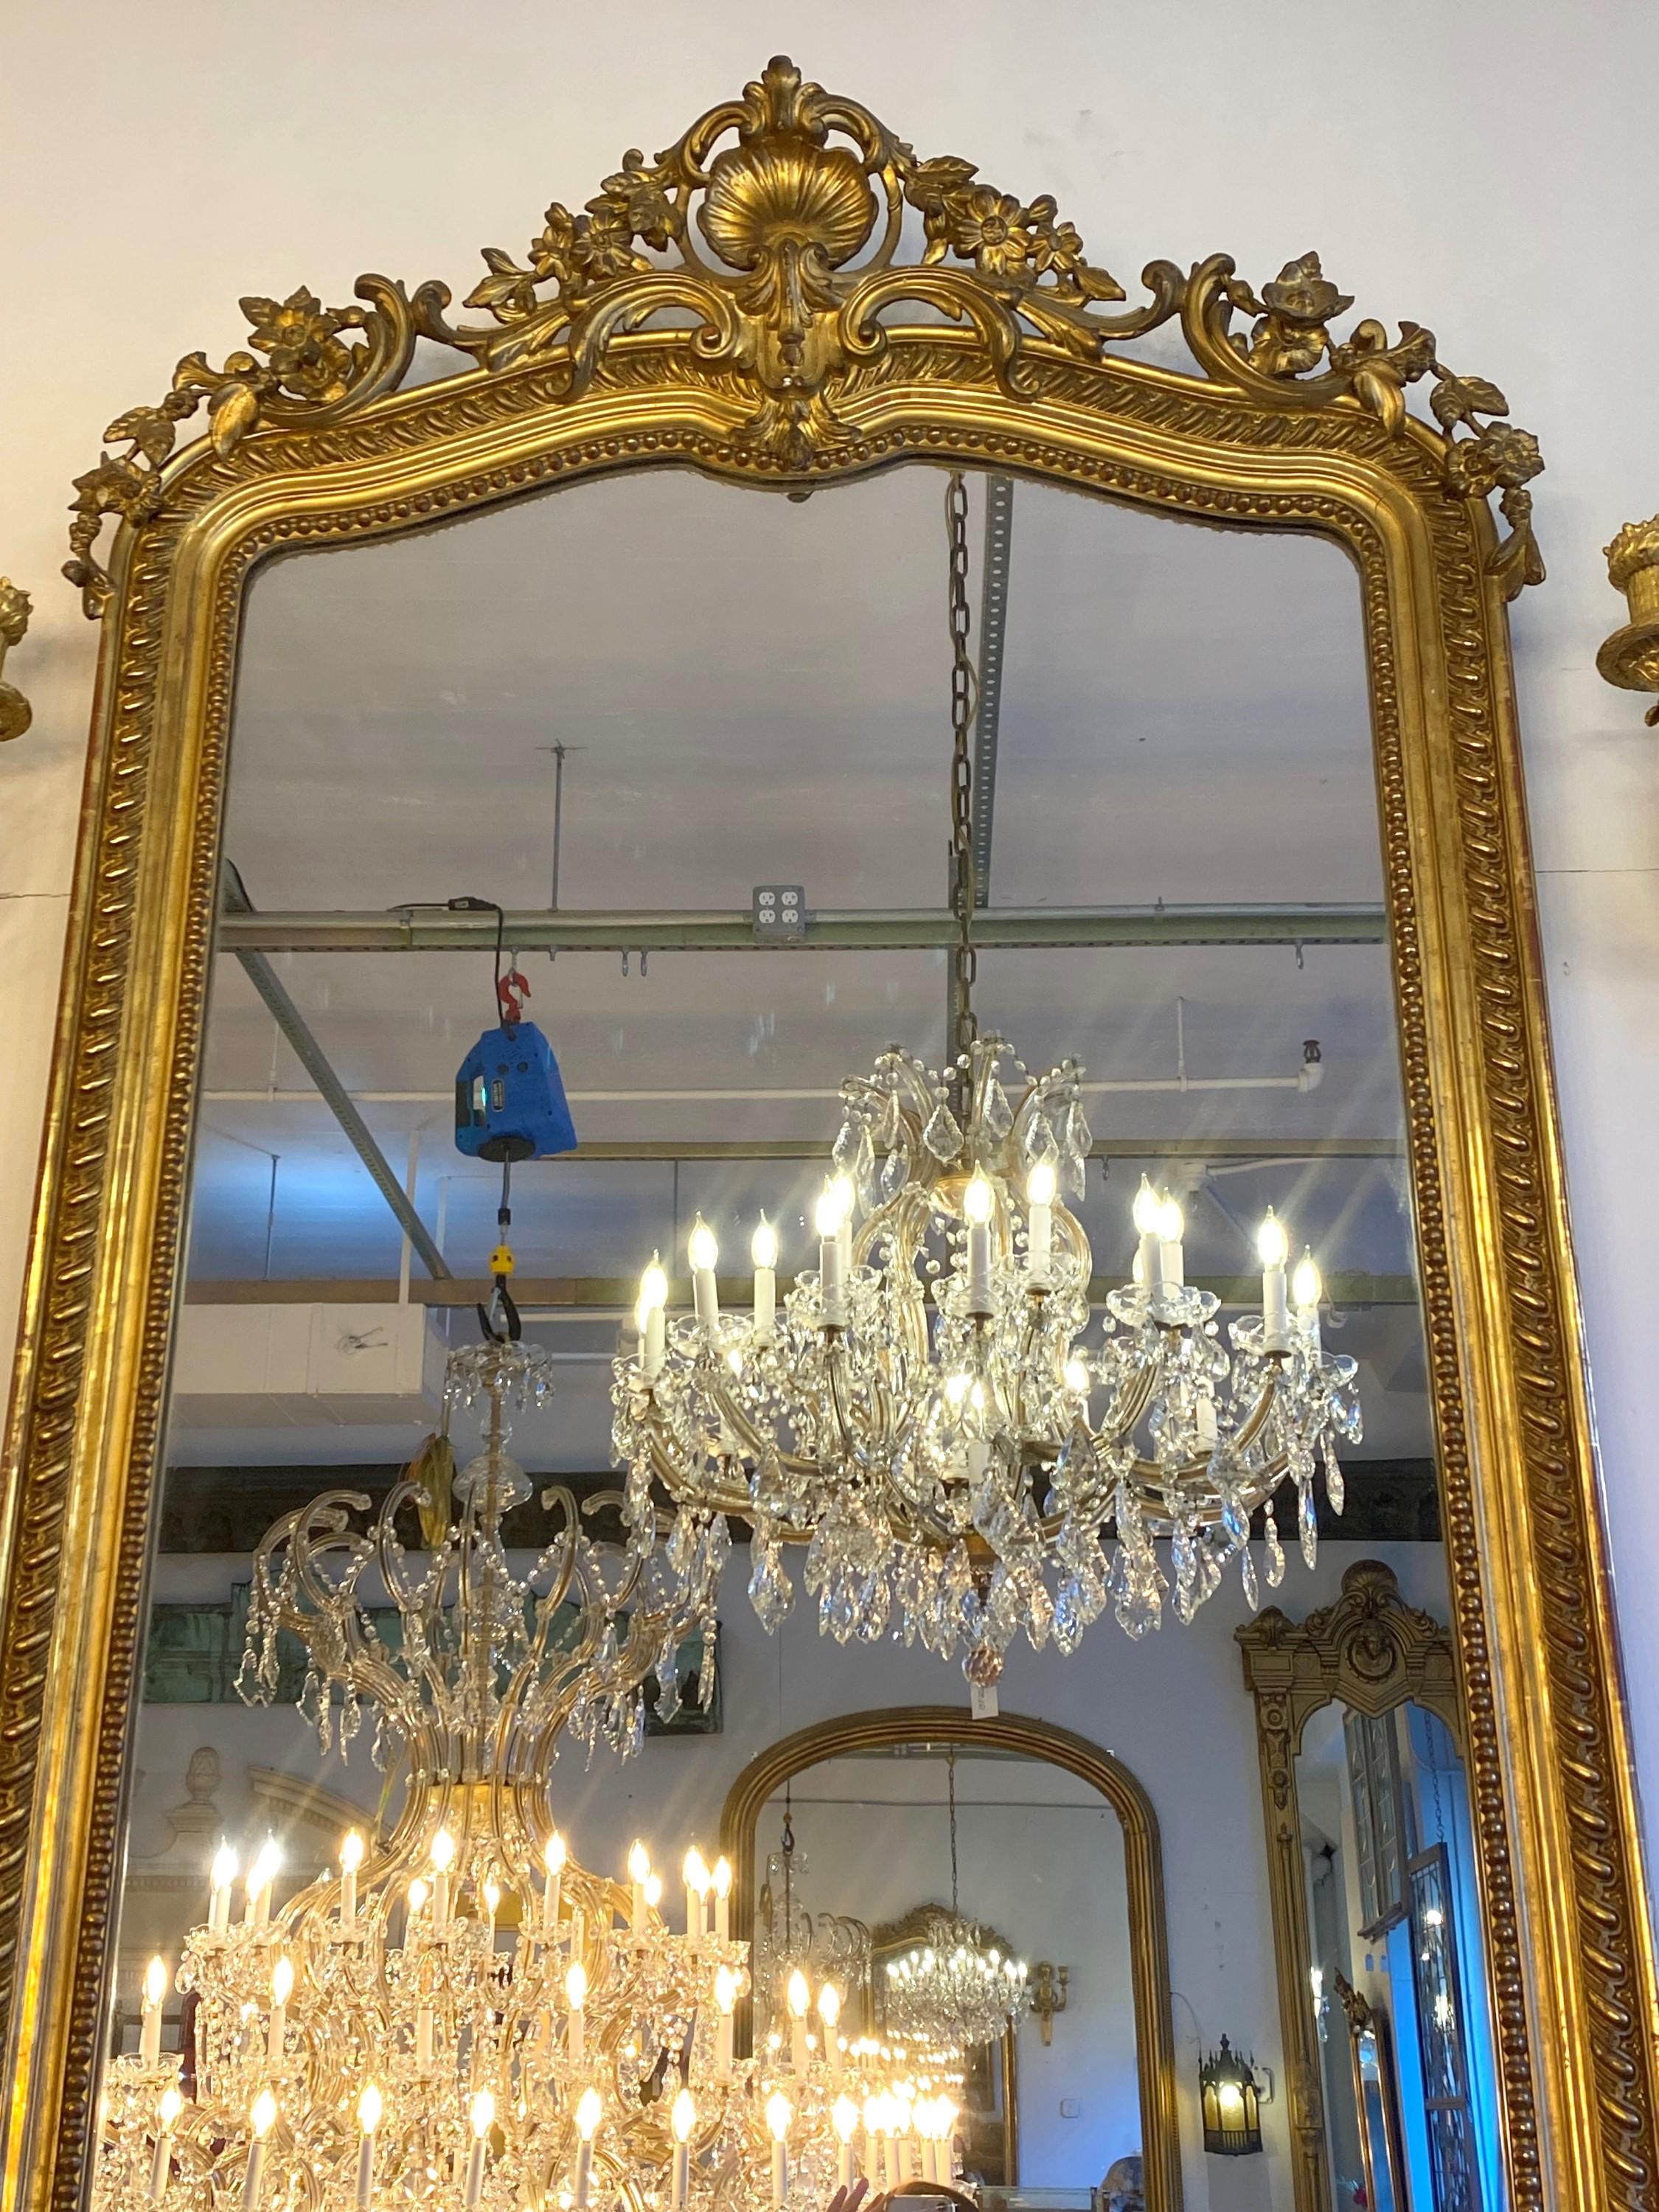 20th Century French Antique Gilt Wood Gesso Over Mantel Mirror Floral Shell Flowers For Sale